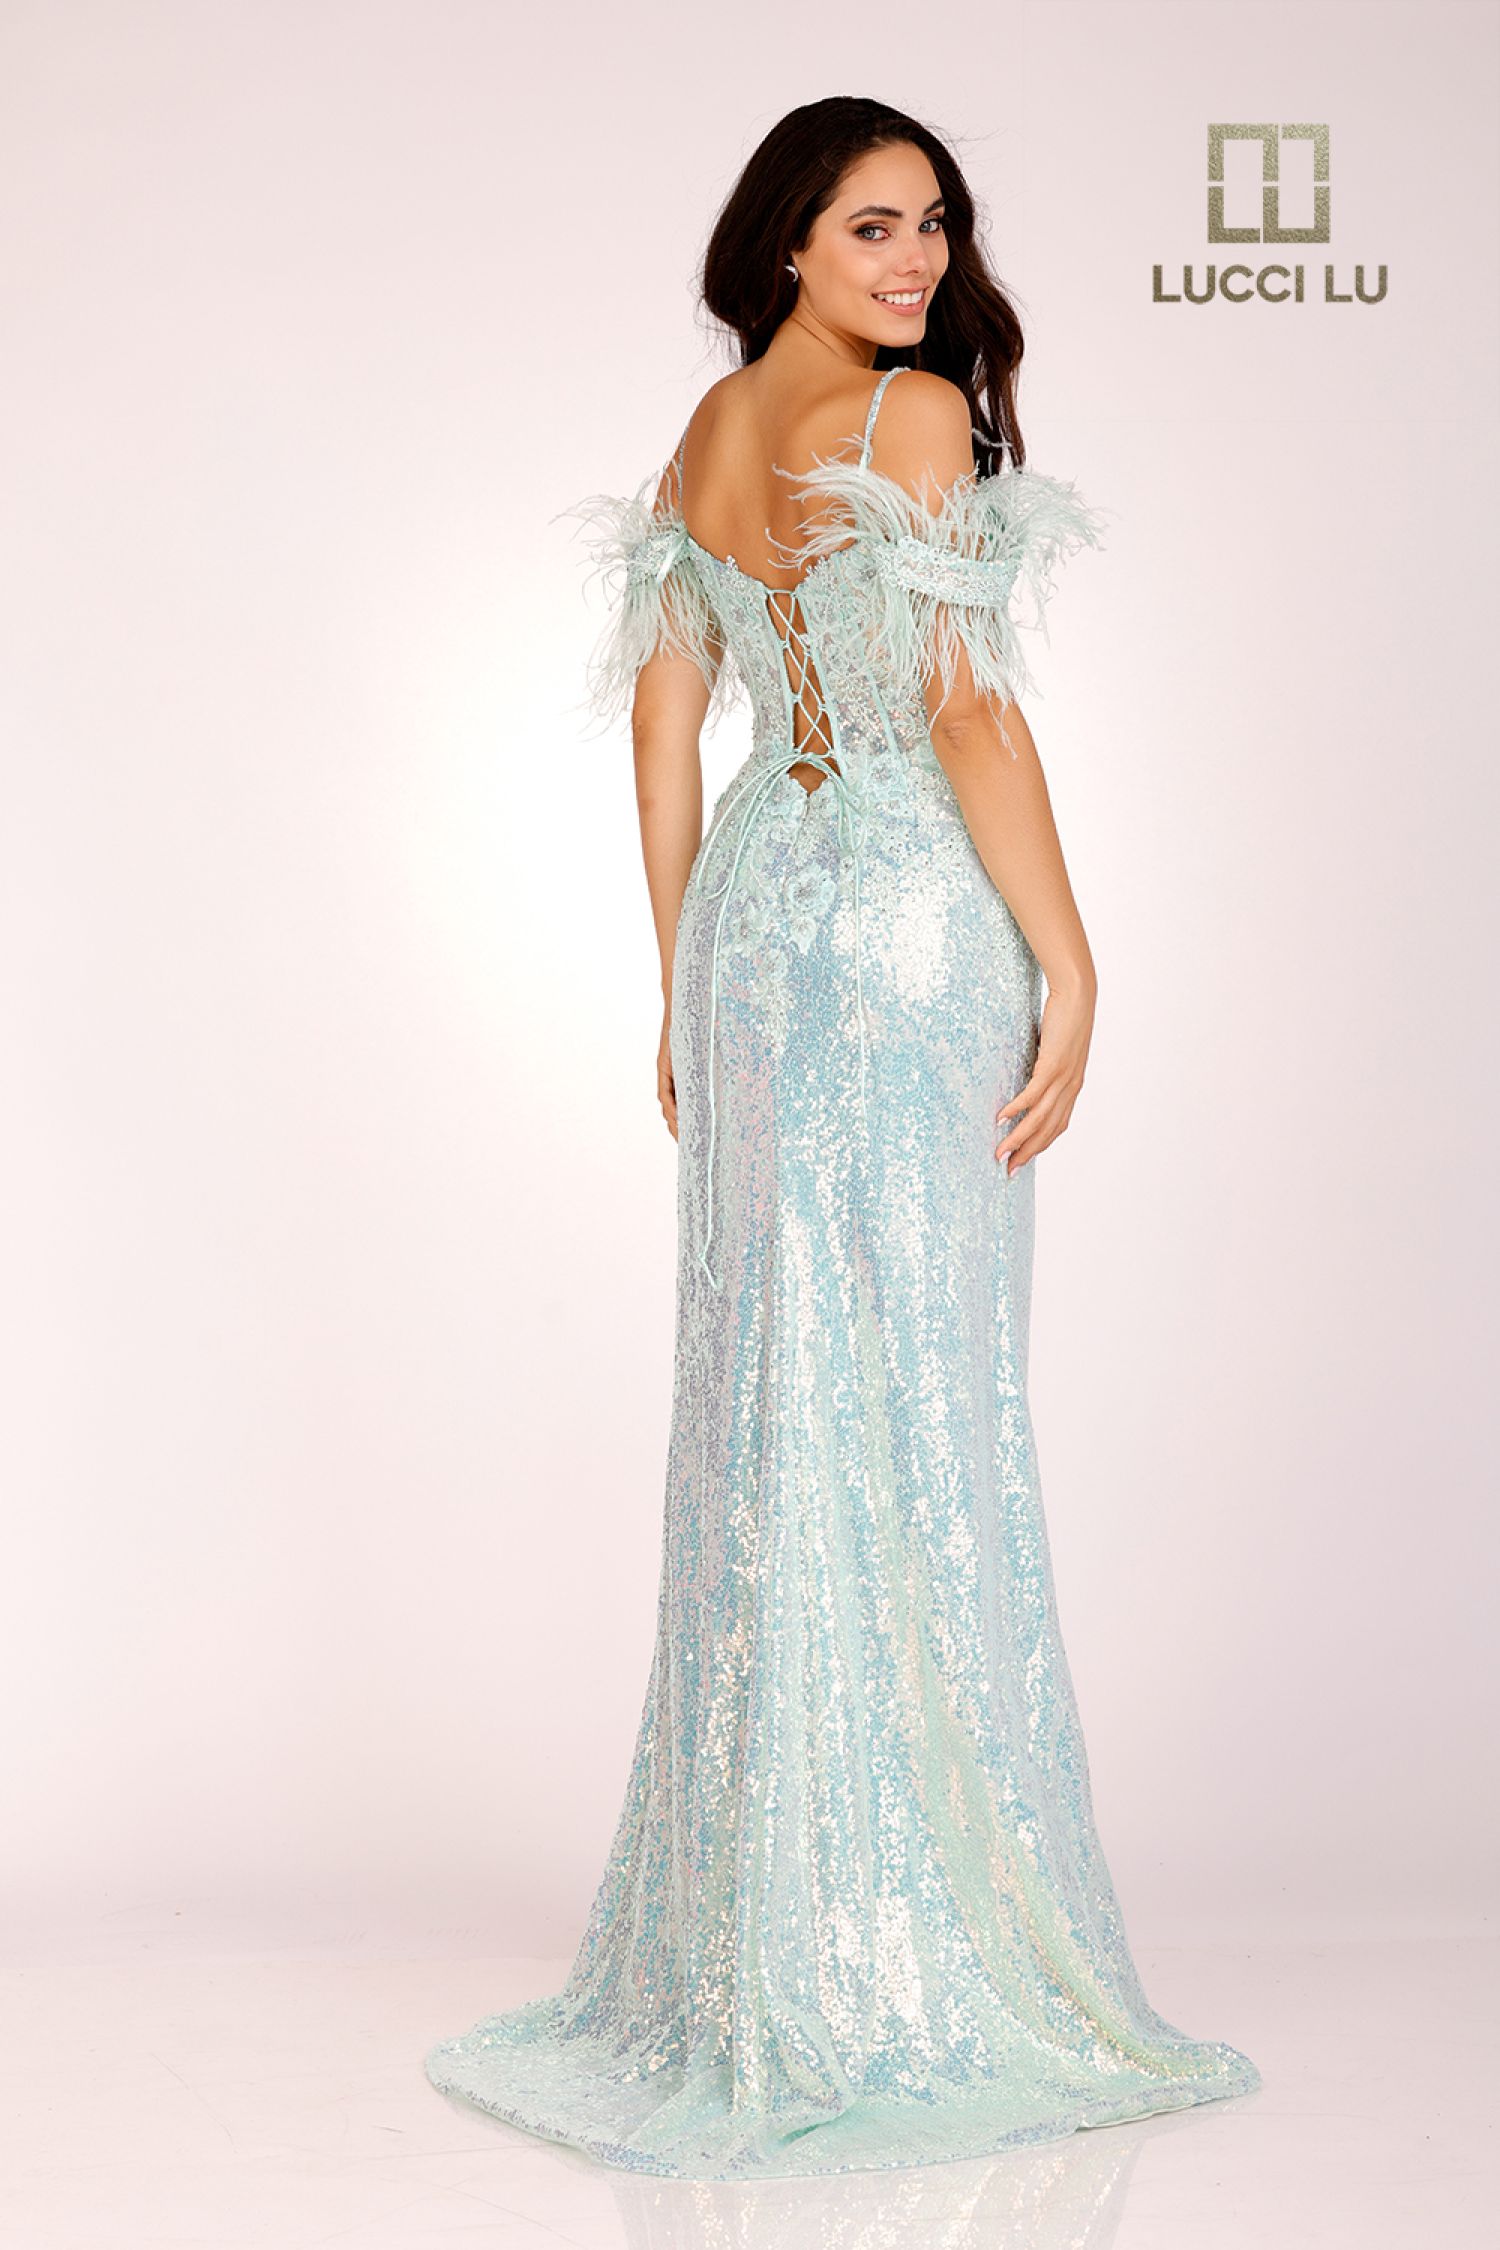 Lucci Li 1282 Long Fitted Sequin Sheer Lace Feather off the Shoulder Prom Dress Formal Gown Corset Back  Sizes: 00-12  Colors: Light Blue, Light Green, Light Pink